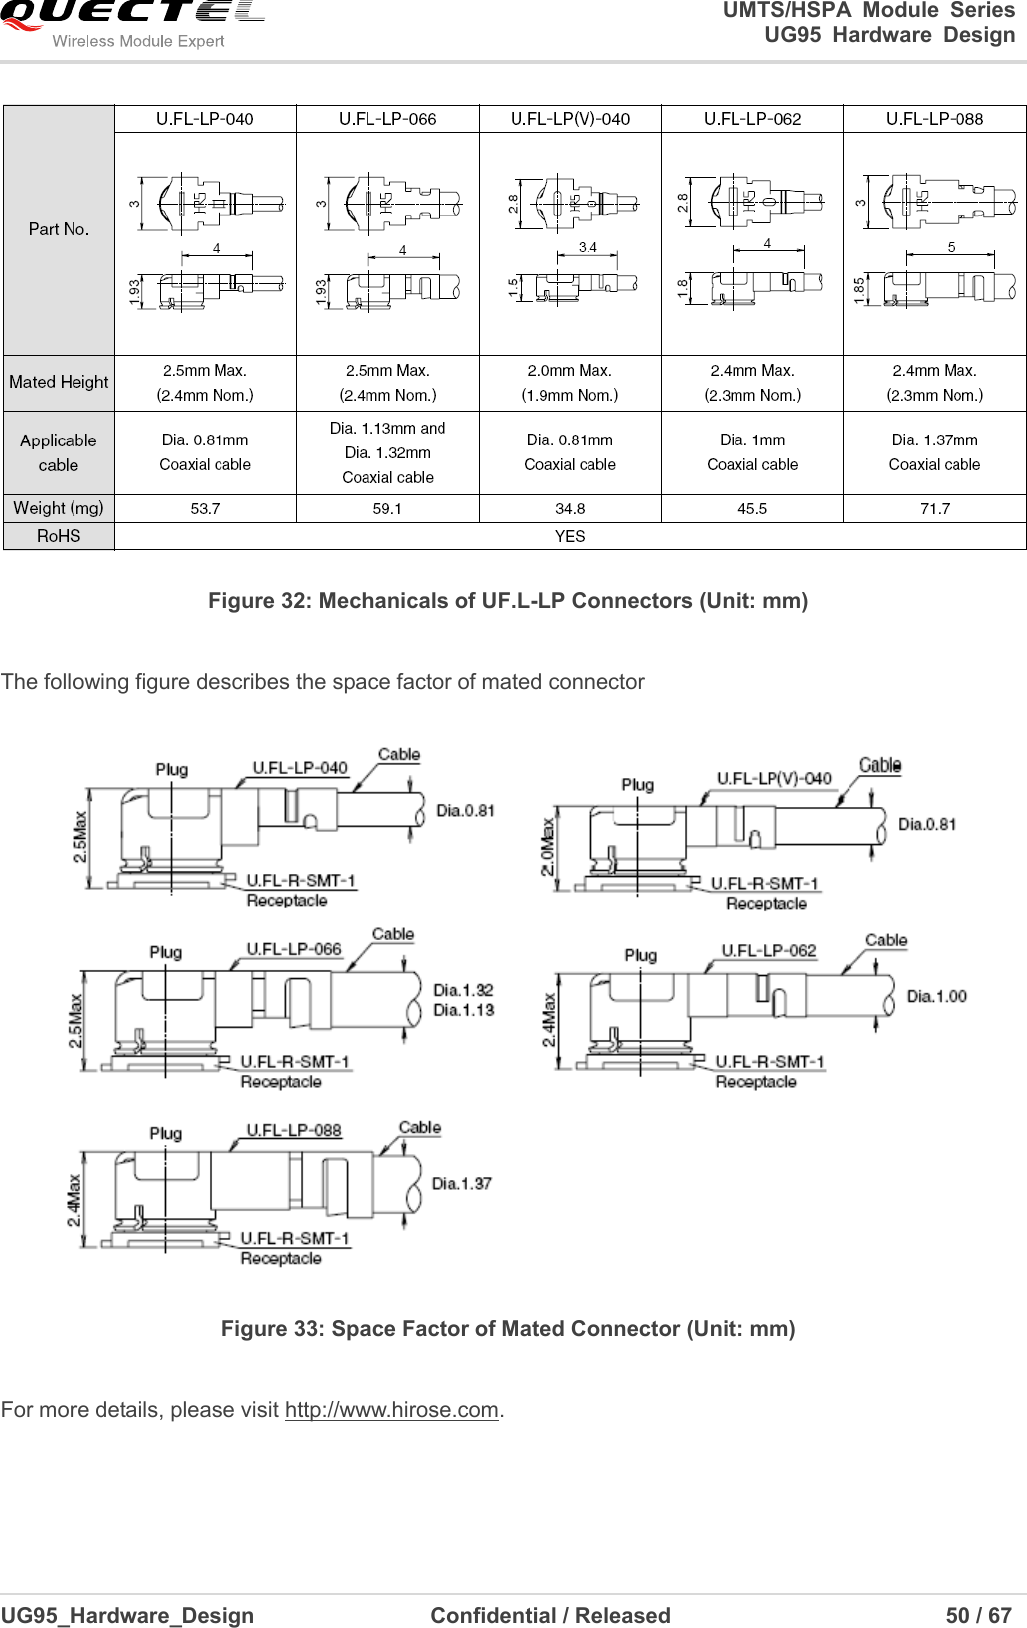                                                                                                                                               UMTS/HSPA  Module  Series                                                                 UG95  Hardware  Design  UG95_Hardware_Design                  Confidential / Released                             50 / 67     Figure 32: Mechanicals of UF.L-LP Connectors (Unit: mm)  The following figure describes the space factor of mated connector   Figure 33: Space Factor of Mated Connector (Unit: mm)  For more details, please visit http://www.hirose.com. 